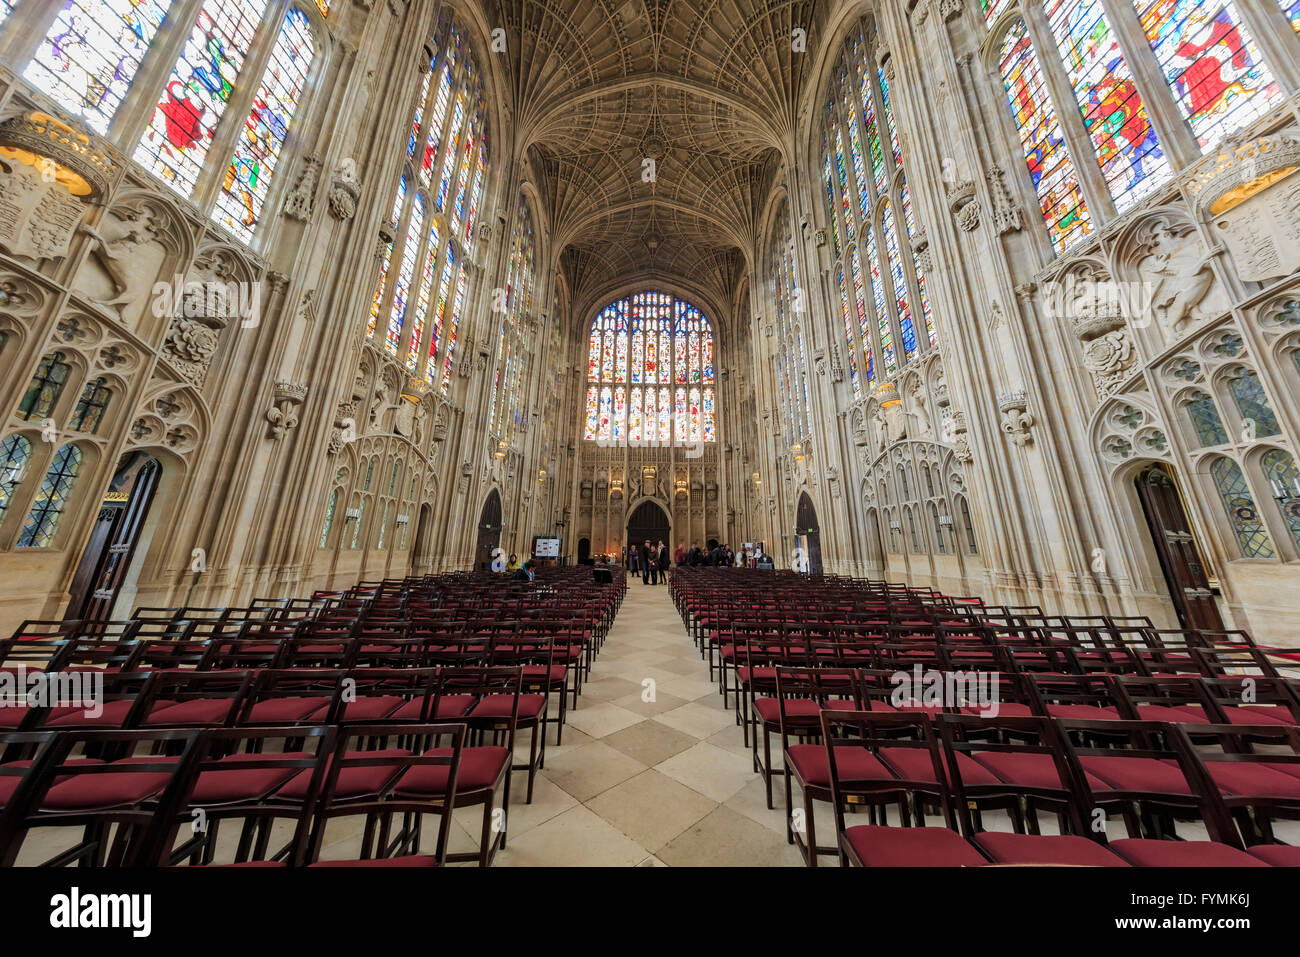 Cambridge, APR 16: The interior of church of King's College on APR 16, 2016 at Cambridge Stock Photo